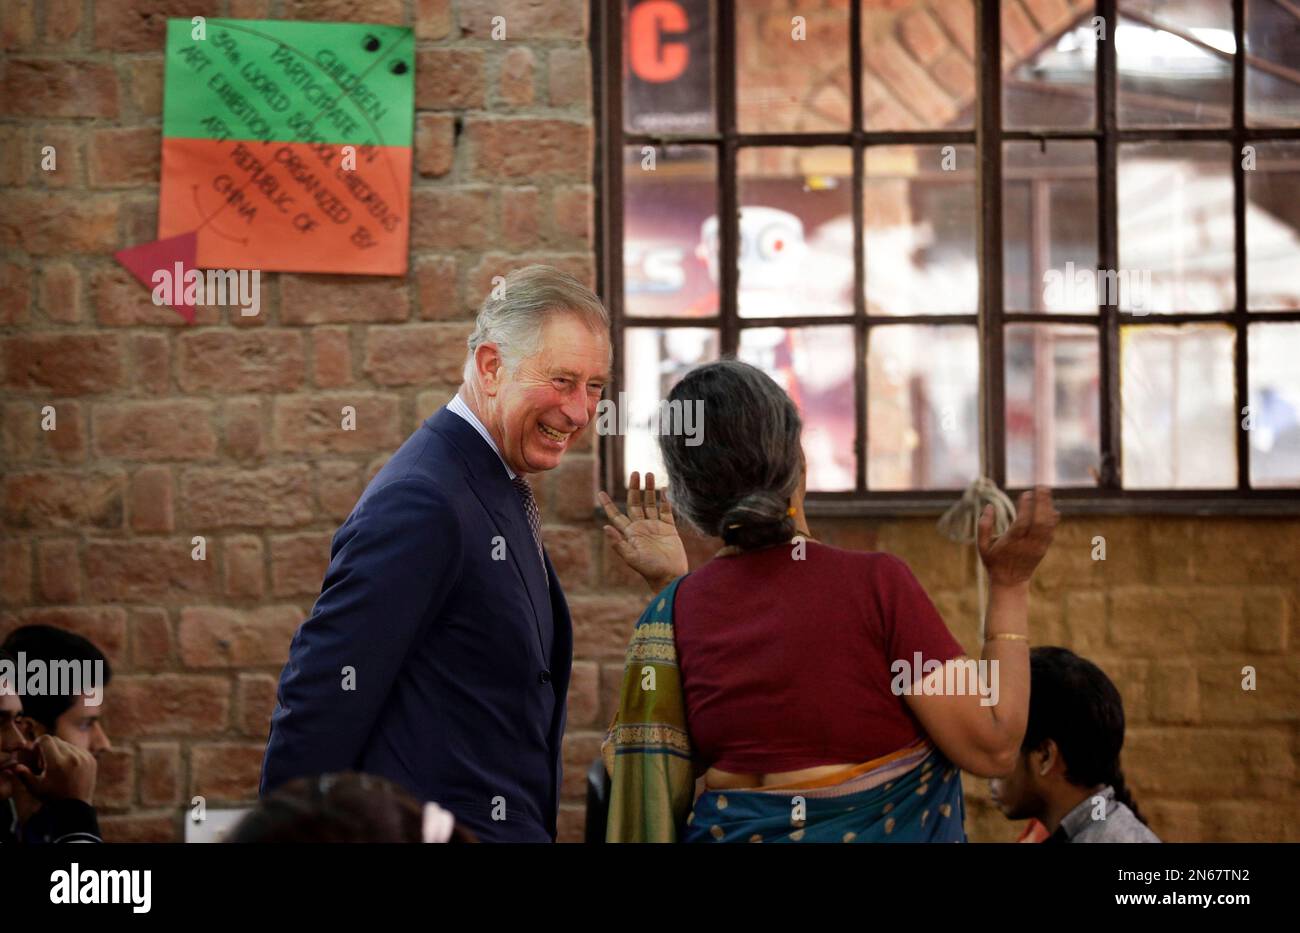 Britain's Prince Charles laughs as he speaks with a school official at Katha Lab School, a school for underprivileged children, in New Delhi, India, Friday, Nov. 8, 2013. Charles and his wife Camilla, the Duchess of Cornwall, are on a nine-day visit to India. (AP Photo/Saurabh Das) Banque D'Images